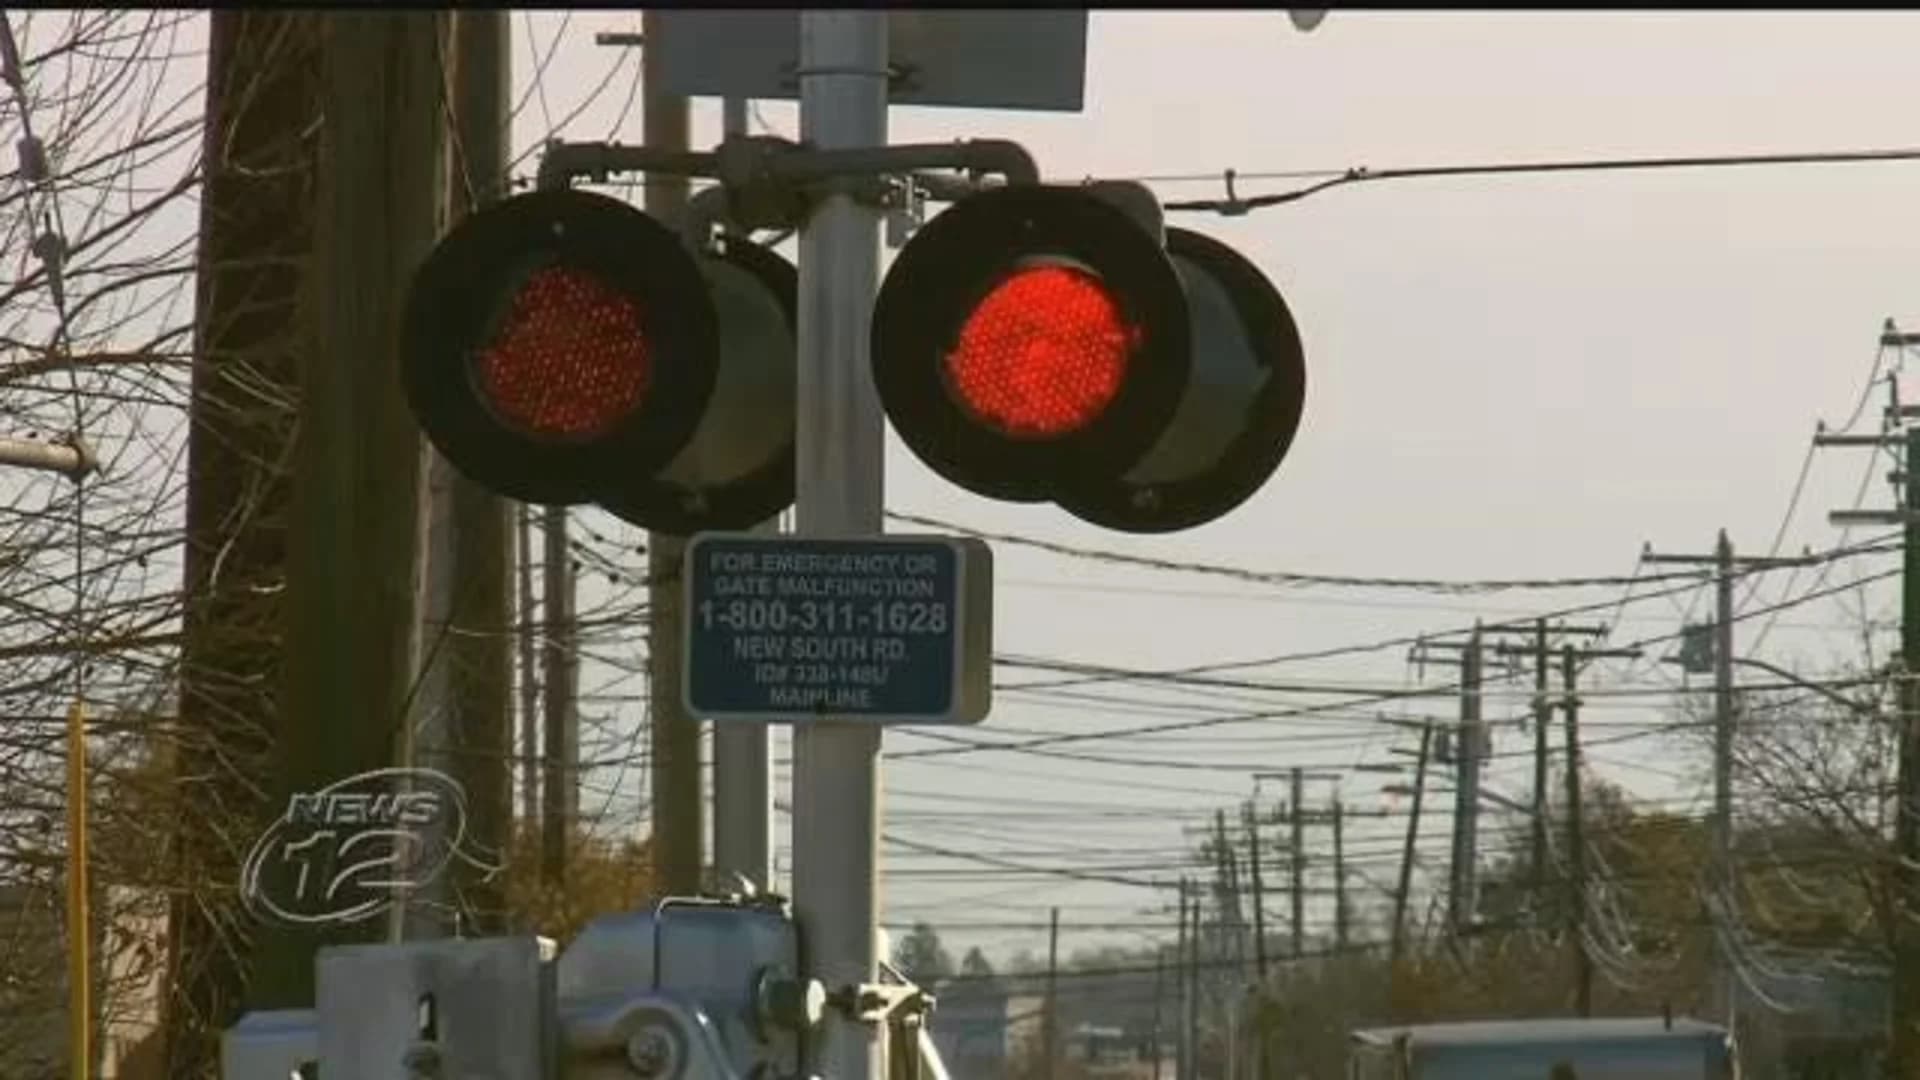 MTA, LIRR: 7 incidents at rail crossing in 2018